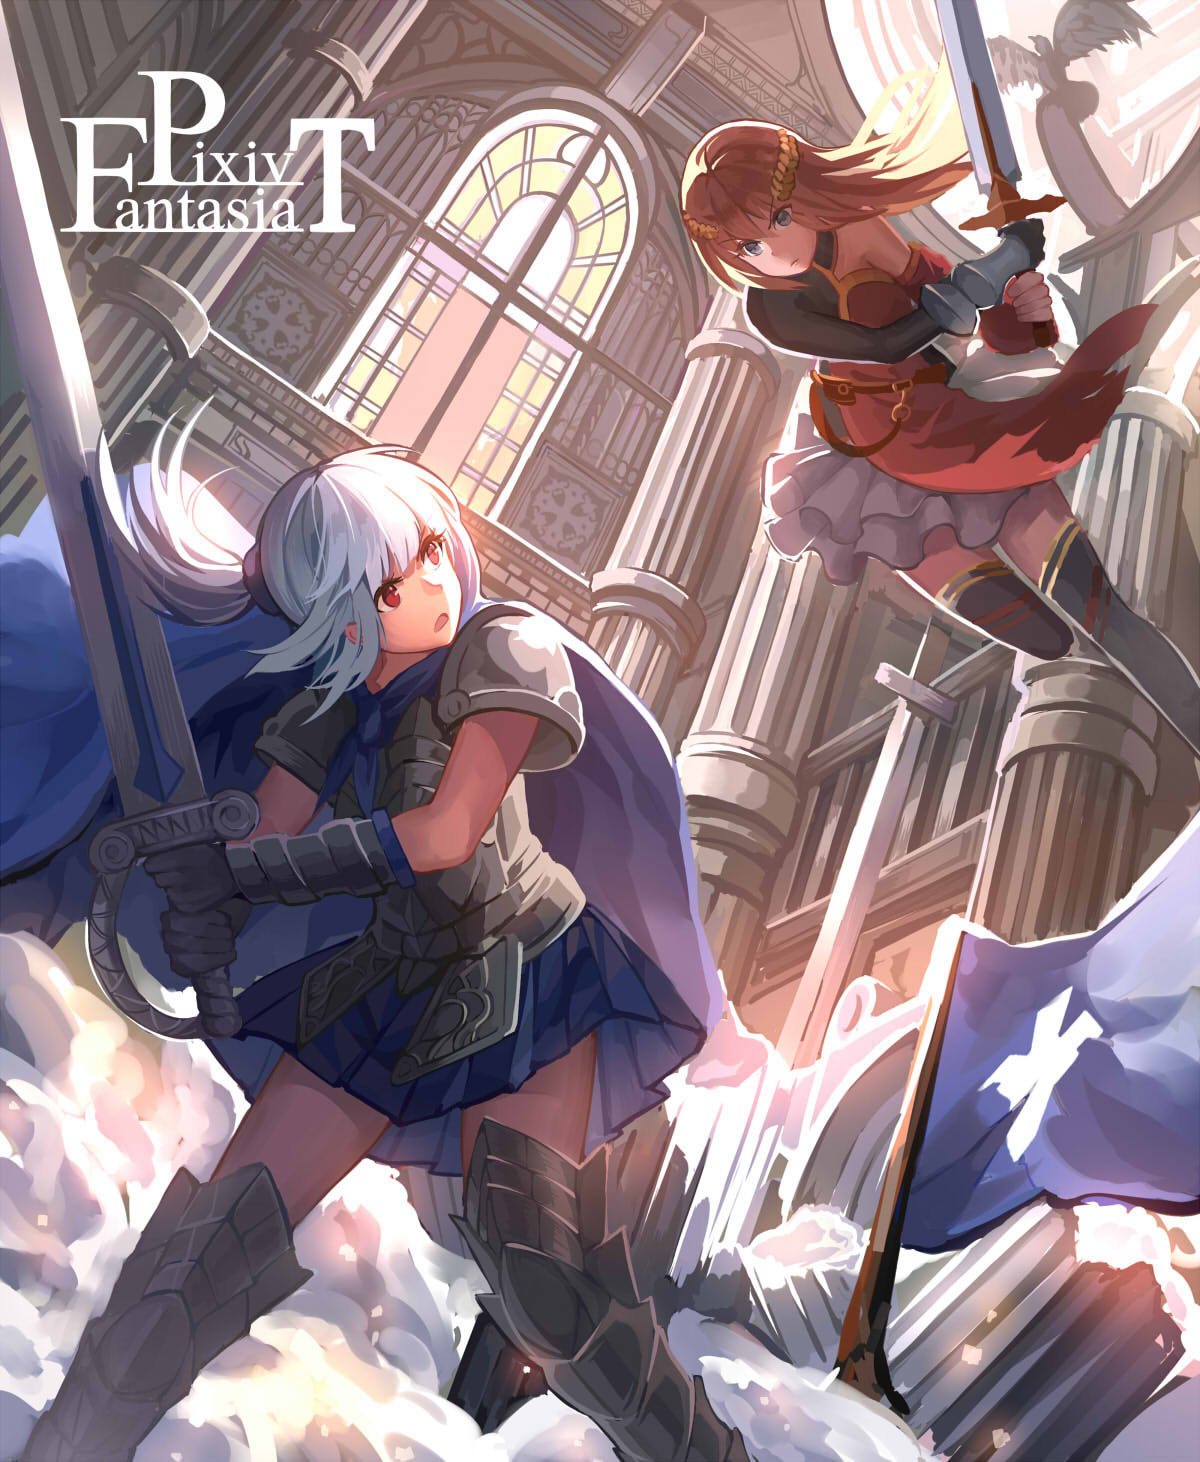 2girls armor armored_boots bangs bare_shoulders black_legwear blue_eyes boots cape copyright_name eye_contact eyebrows_visible_through_hair fighting_stance gauntlets highres holding holding_sword holding_weapon hunxiao_xingshuang leggings long_hair looking_at_another miniskirt multiple_girls open_mouth original pillar pixiv_fantasia pixiv_fantasia_1 pixiv_fantasia_t plate_armor ponytail red_eyes redhead skirt sword thigh-highs tongue weapon white_hair zettai_ryouiki